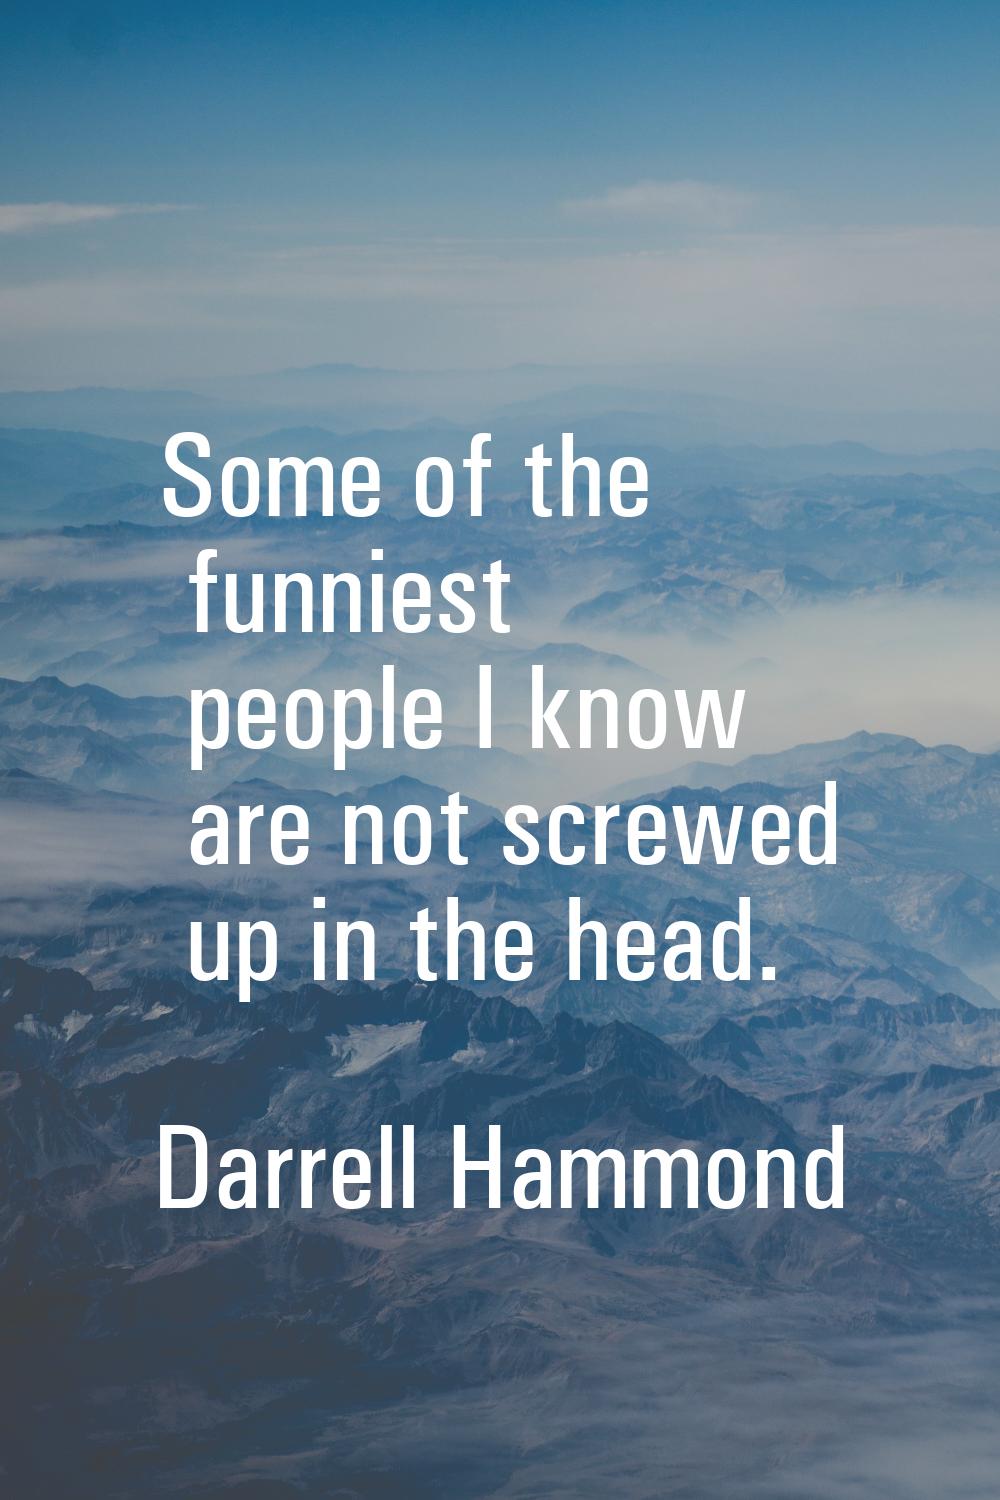 Some of the funniest people I know are not screwed up in the head.